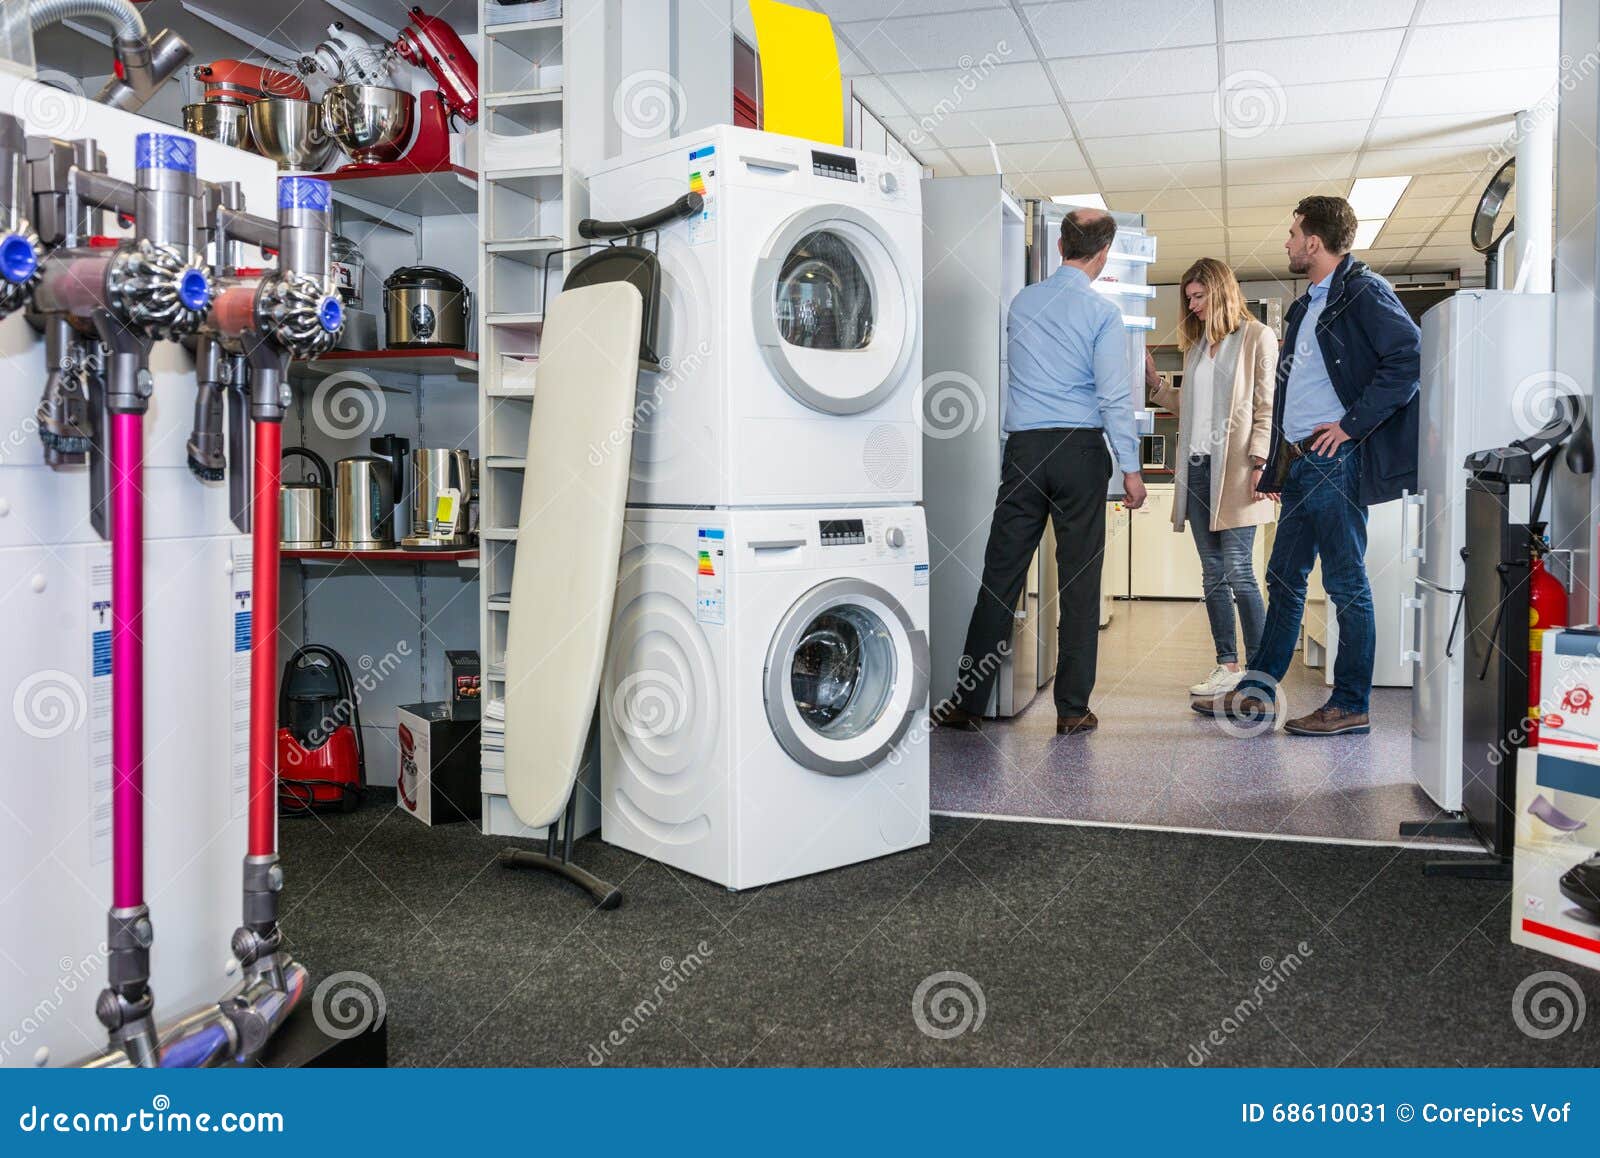 Salesman Assisting Couple in Buying Refrigerator Stock Image - Image of ...